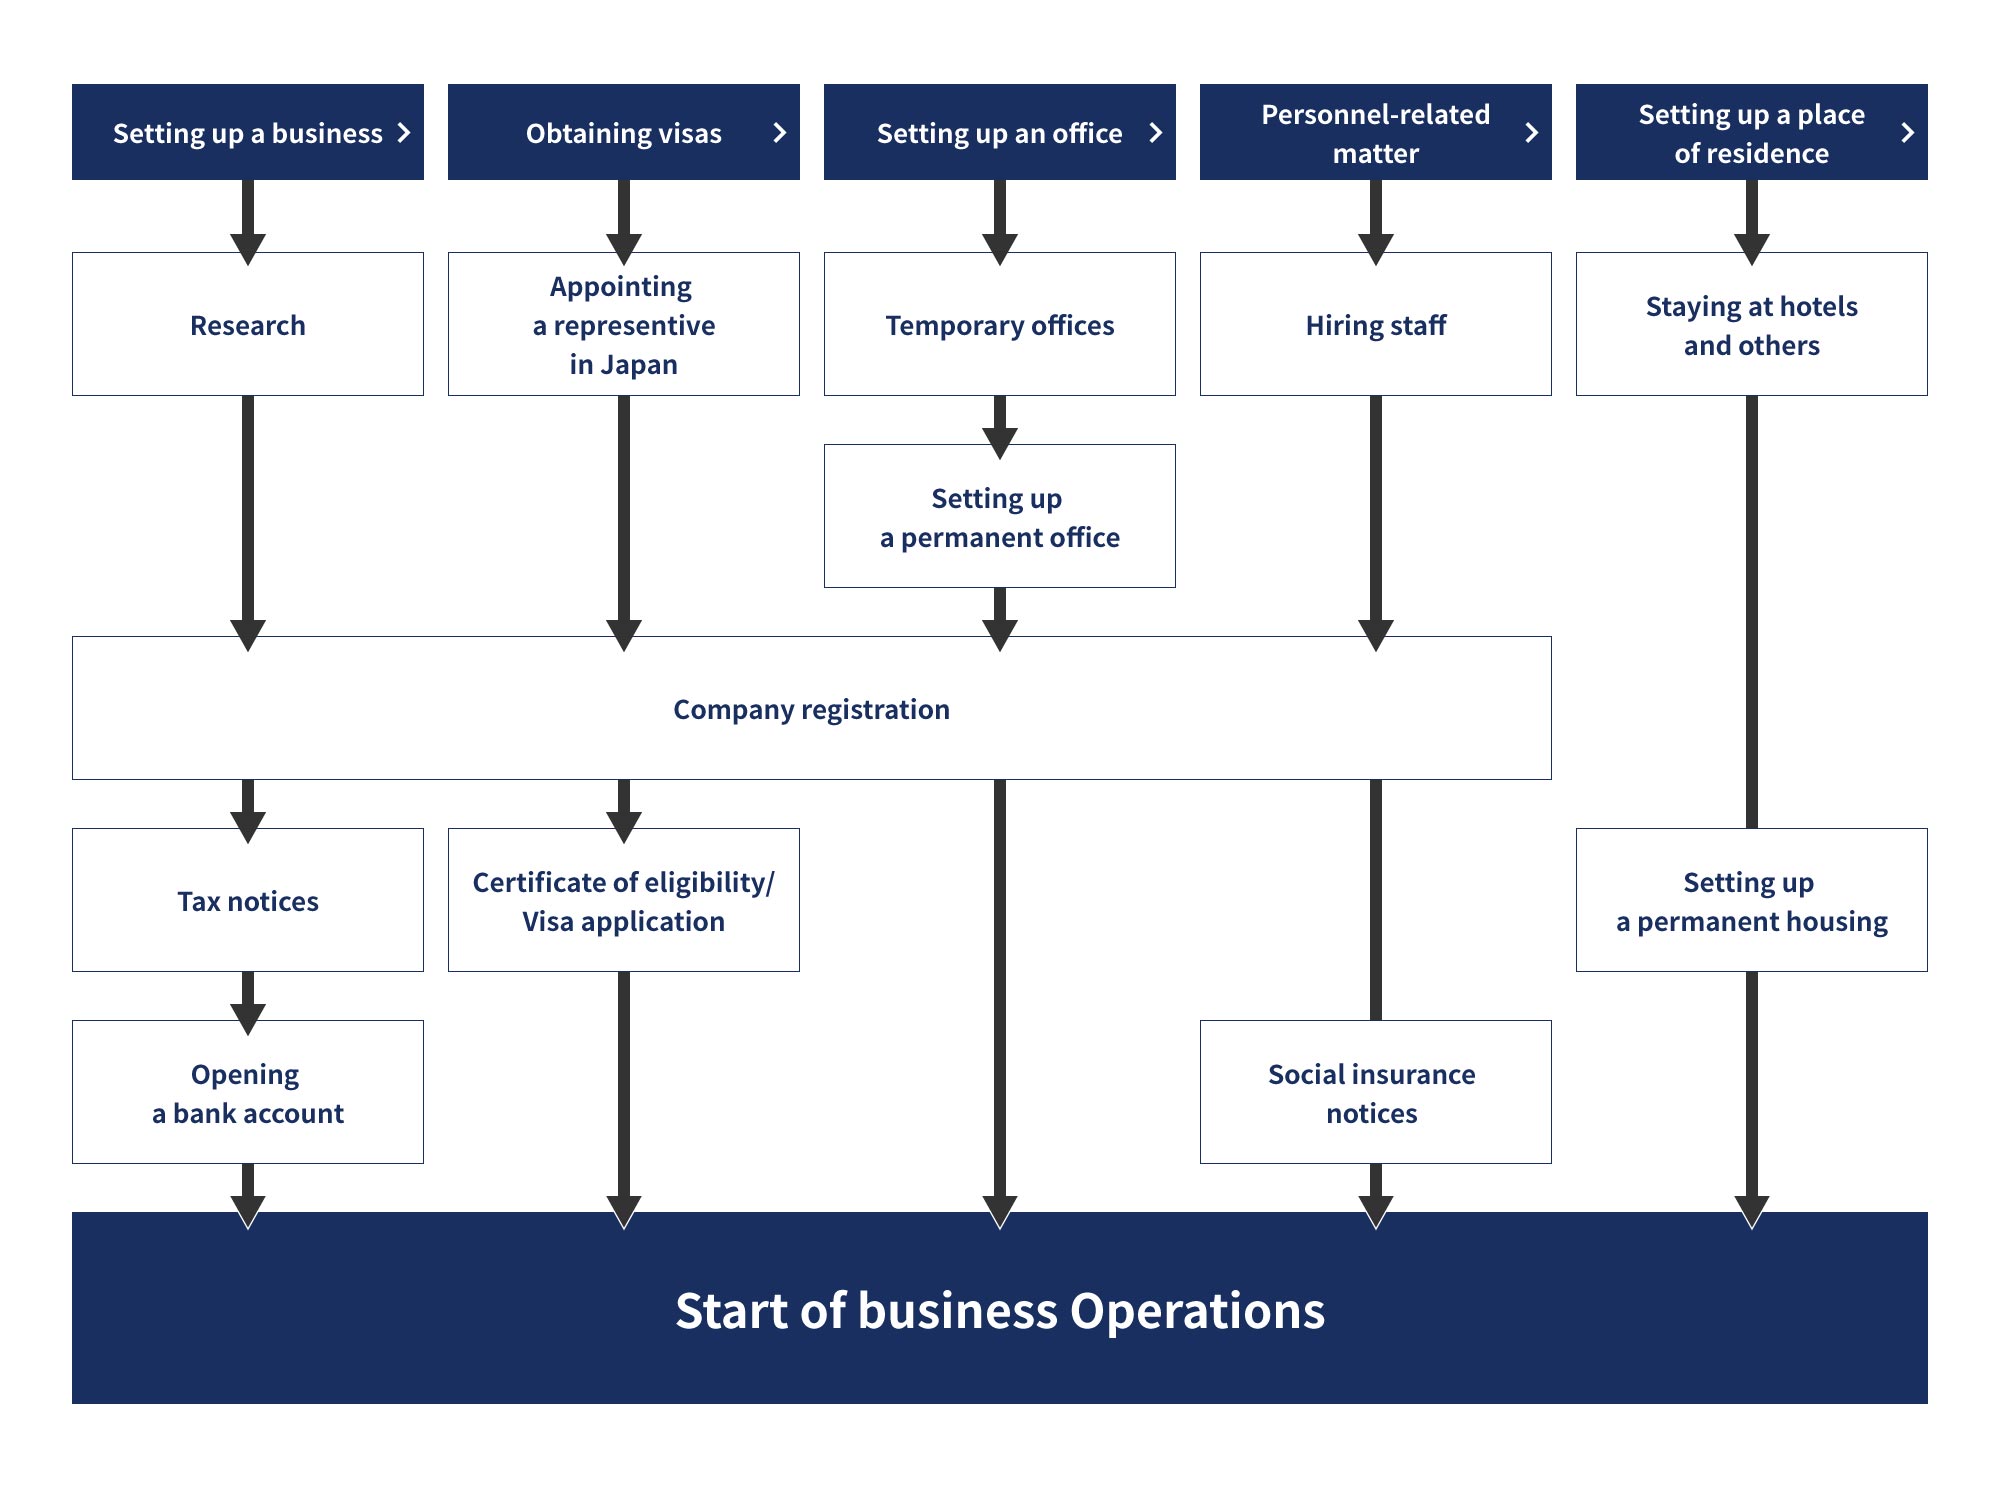 This flowchart shows necessary steps for foreign companies to set up business in Japan.In the section of “Setting up a business”, the following steps are shown to complete before starting business operations: 1) Research, 2) Company registration, 3) Tax notices, and 4) Opening a bank account.In the section of “Obtaining visas”, the following steps are shown to take for obtaining visas before starting business operations: 1) Appointing a representative in Japan, 2) Company registration, and 3) Certificate of eligibility/Visa application.In the section of “Setting up an office”, the following steps are shown to take for setting up an office before starting business operations: 1) Temporary office rental, 2) Setting up a permanent office, and 3) Company registration.In the section of “Personnel-related matters”, the following steps are shown to take for personnel-related matters before starting business operations: 1) Hiring staff, 2) Company registration, and 3) Social insurance notices.In the section of “Setting up a place of residence”, the following steps are shown to take for setting up a place of residence before starting business operations; 1) Staying at hotels and others, and 2) Setting up a permanent housing.